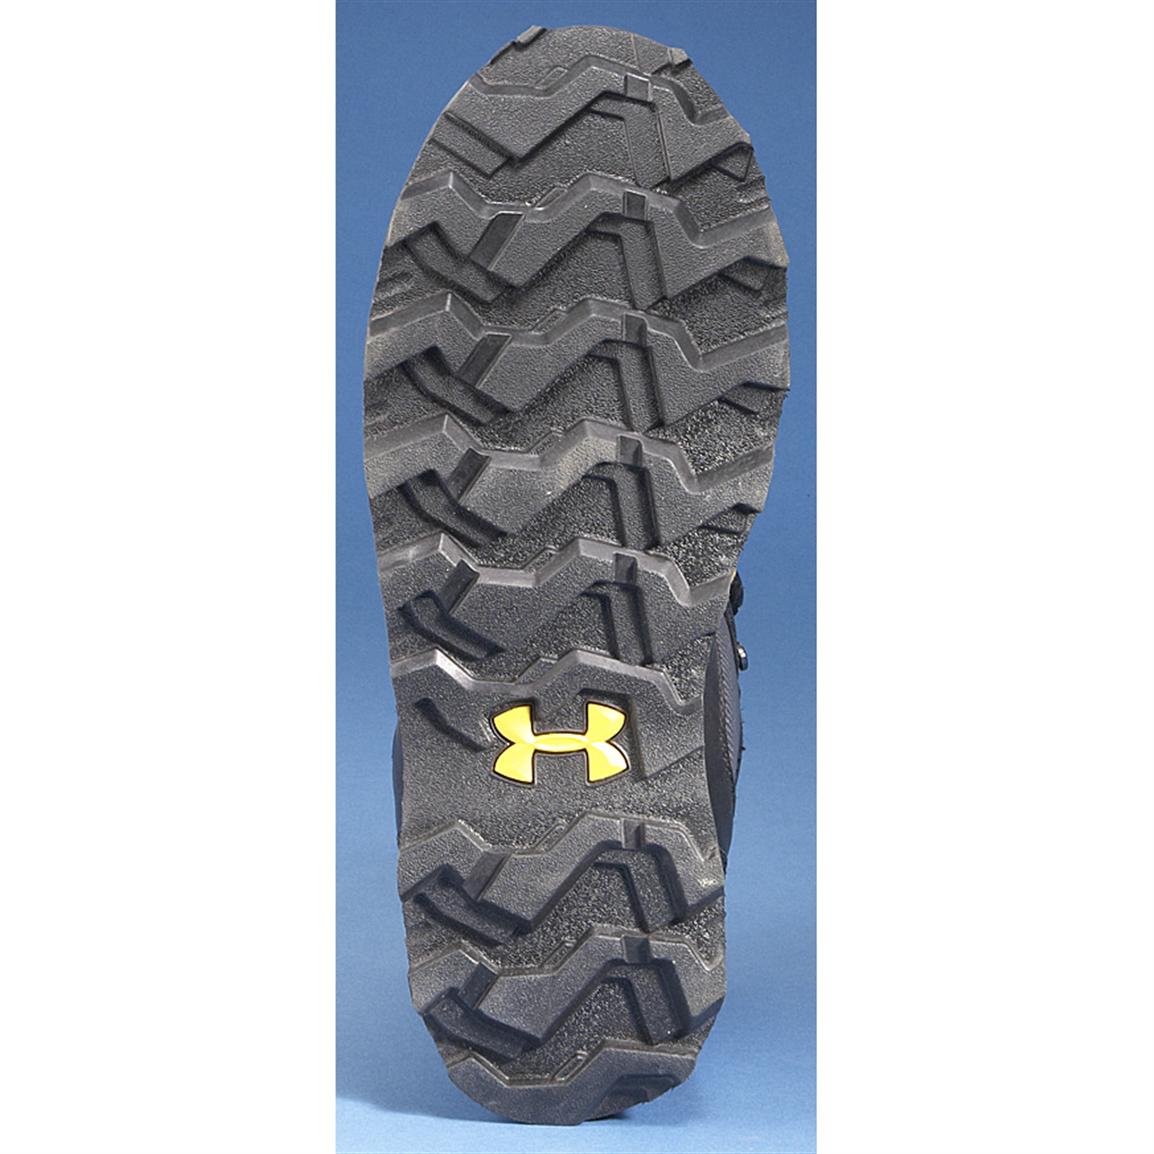 under armour work boots composite toe